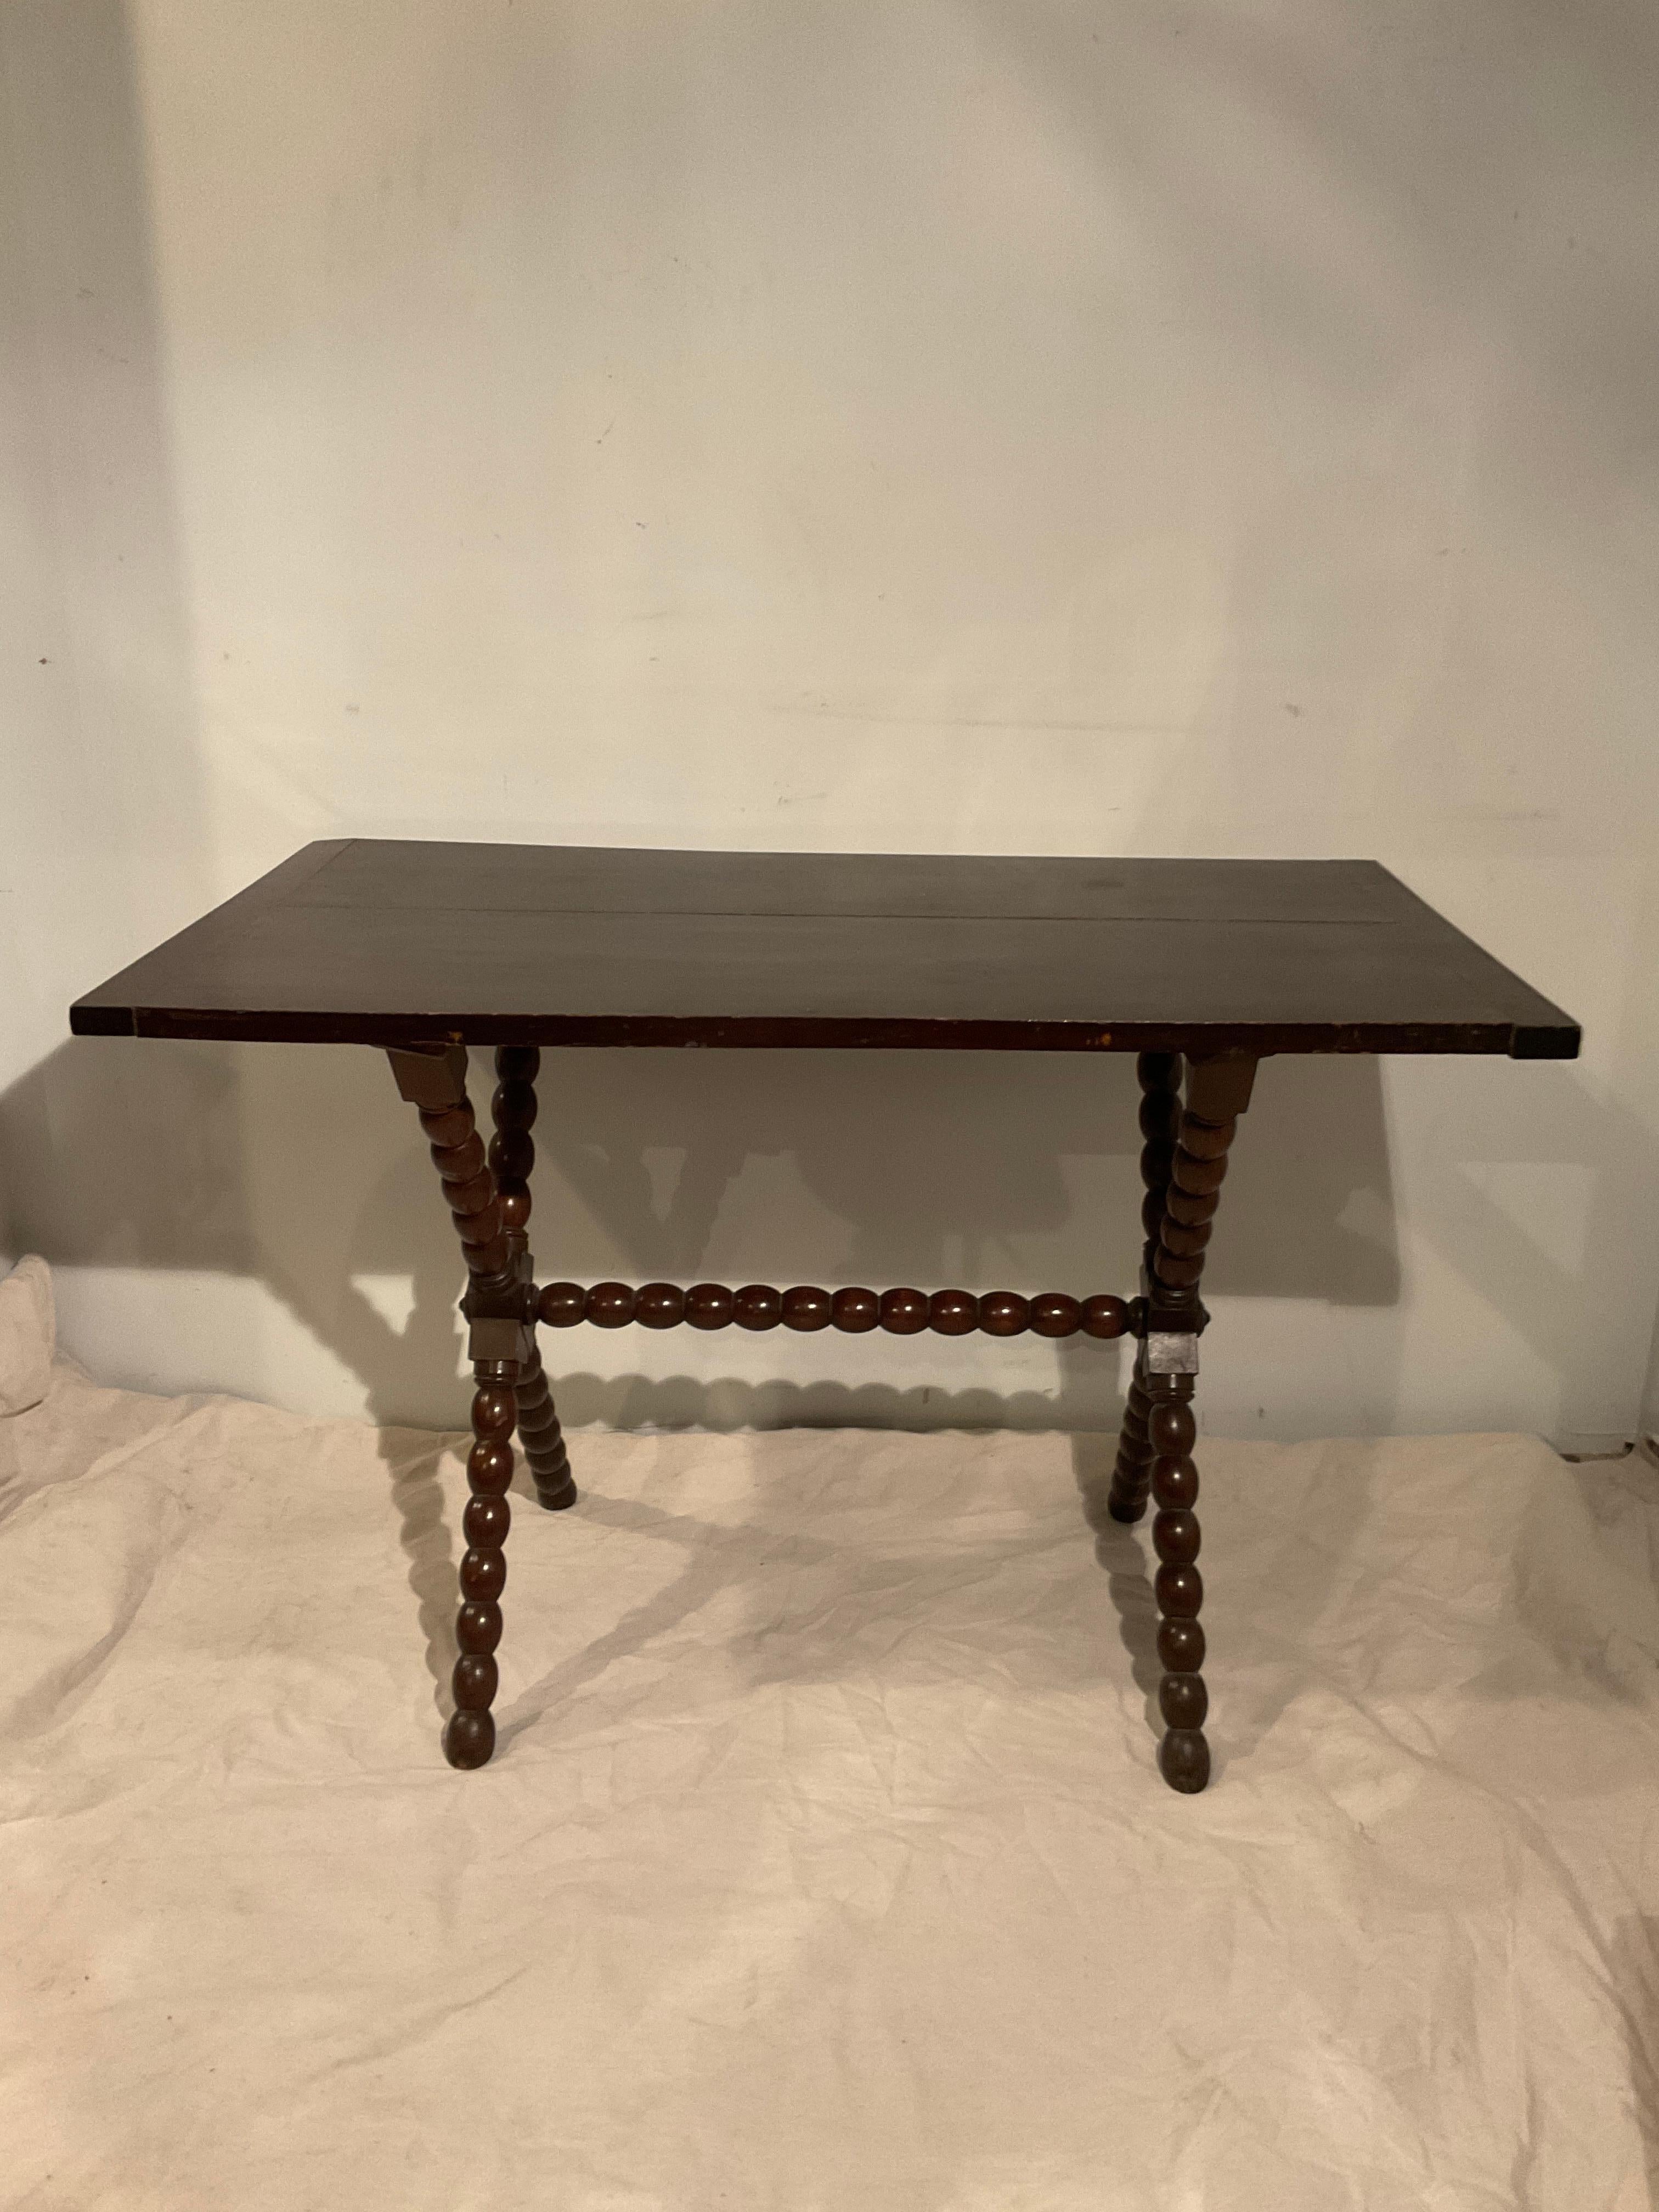 1900 English Bobbin leg table. Some scratches on top as shown in images.